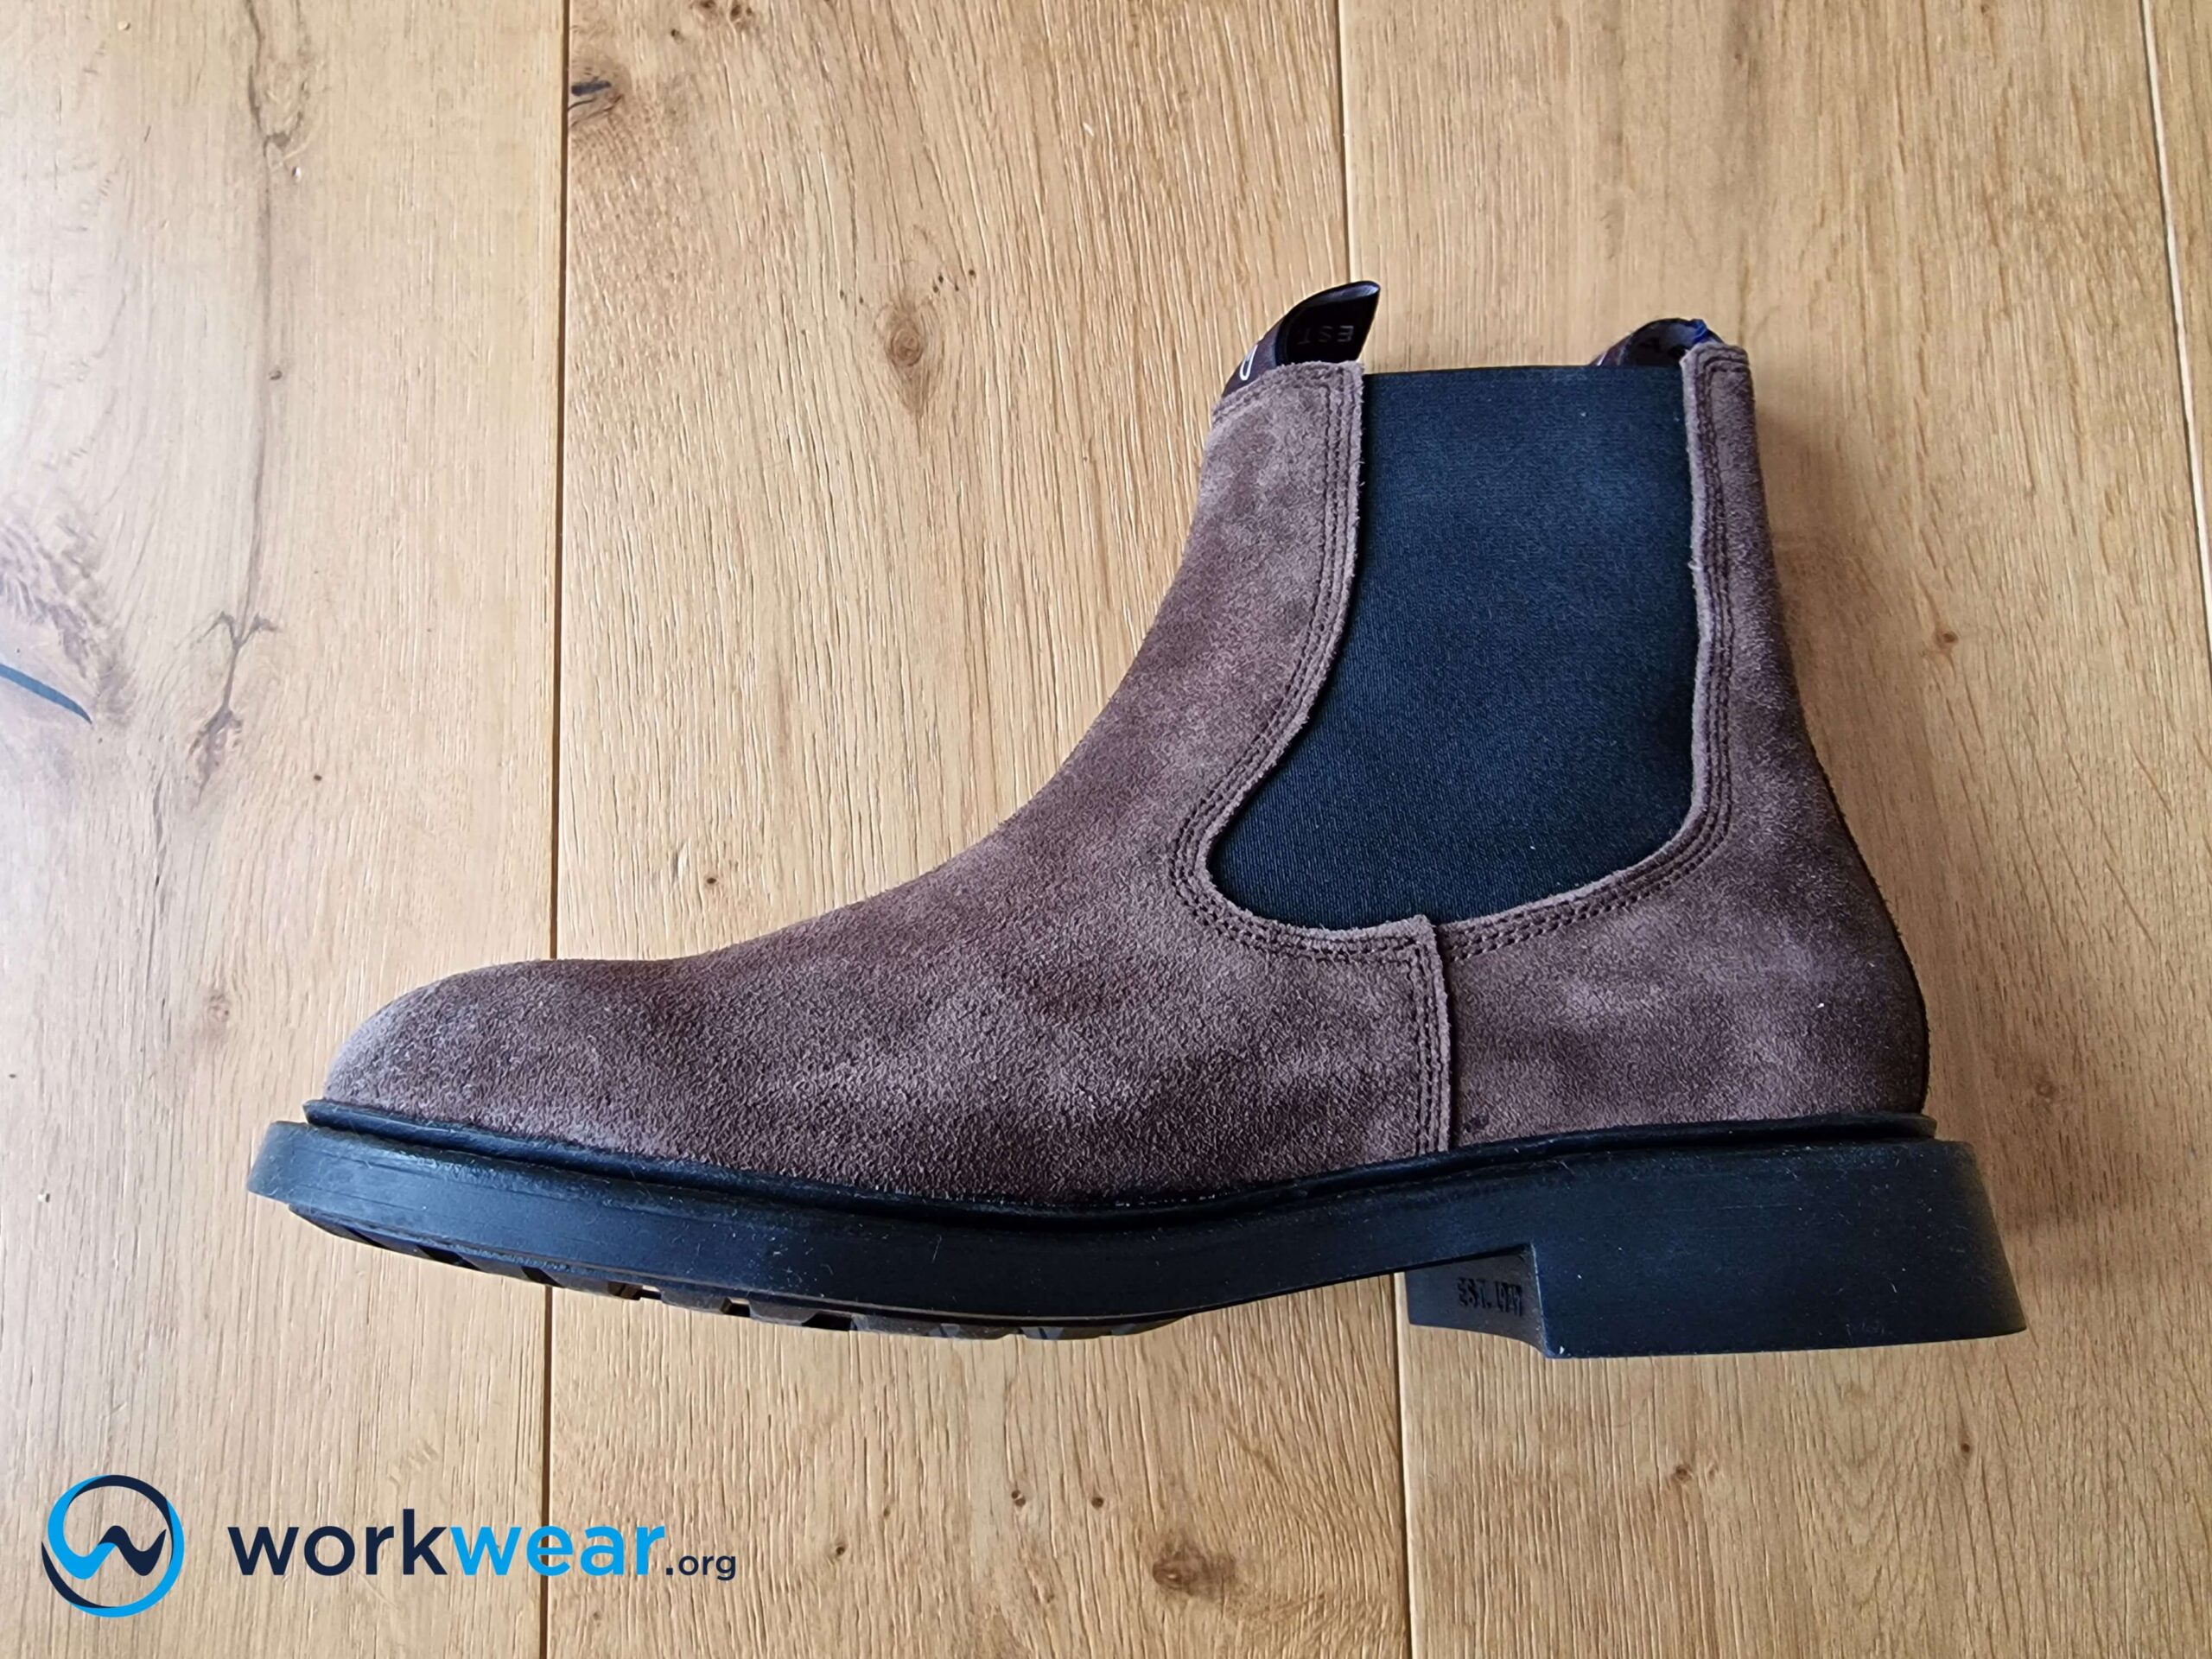 Gant Millbro Chelsea Boots Worn, Evaluated and Reviewed |